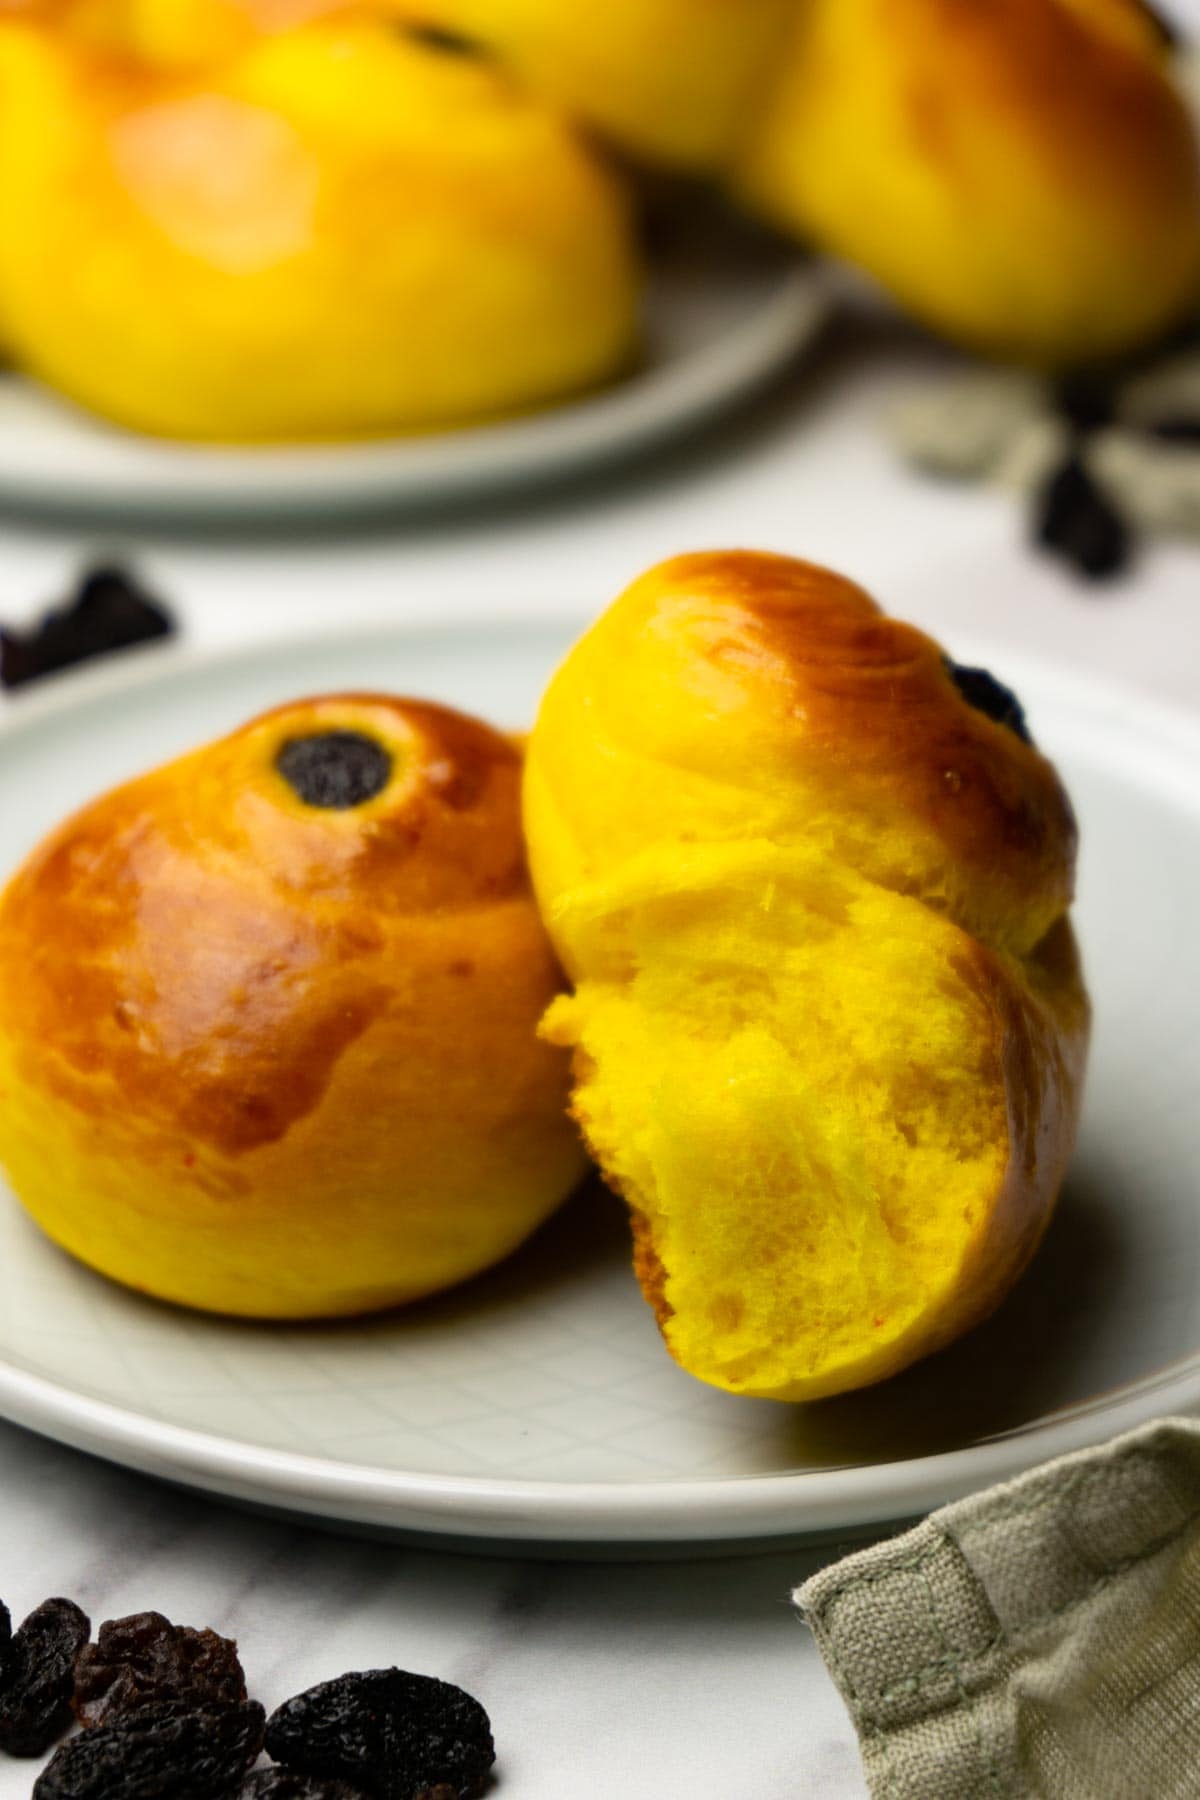 Broken in half saffron bun with raisins on a small round plate, more buns on the background.